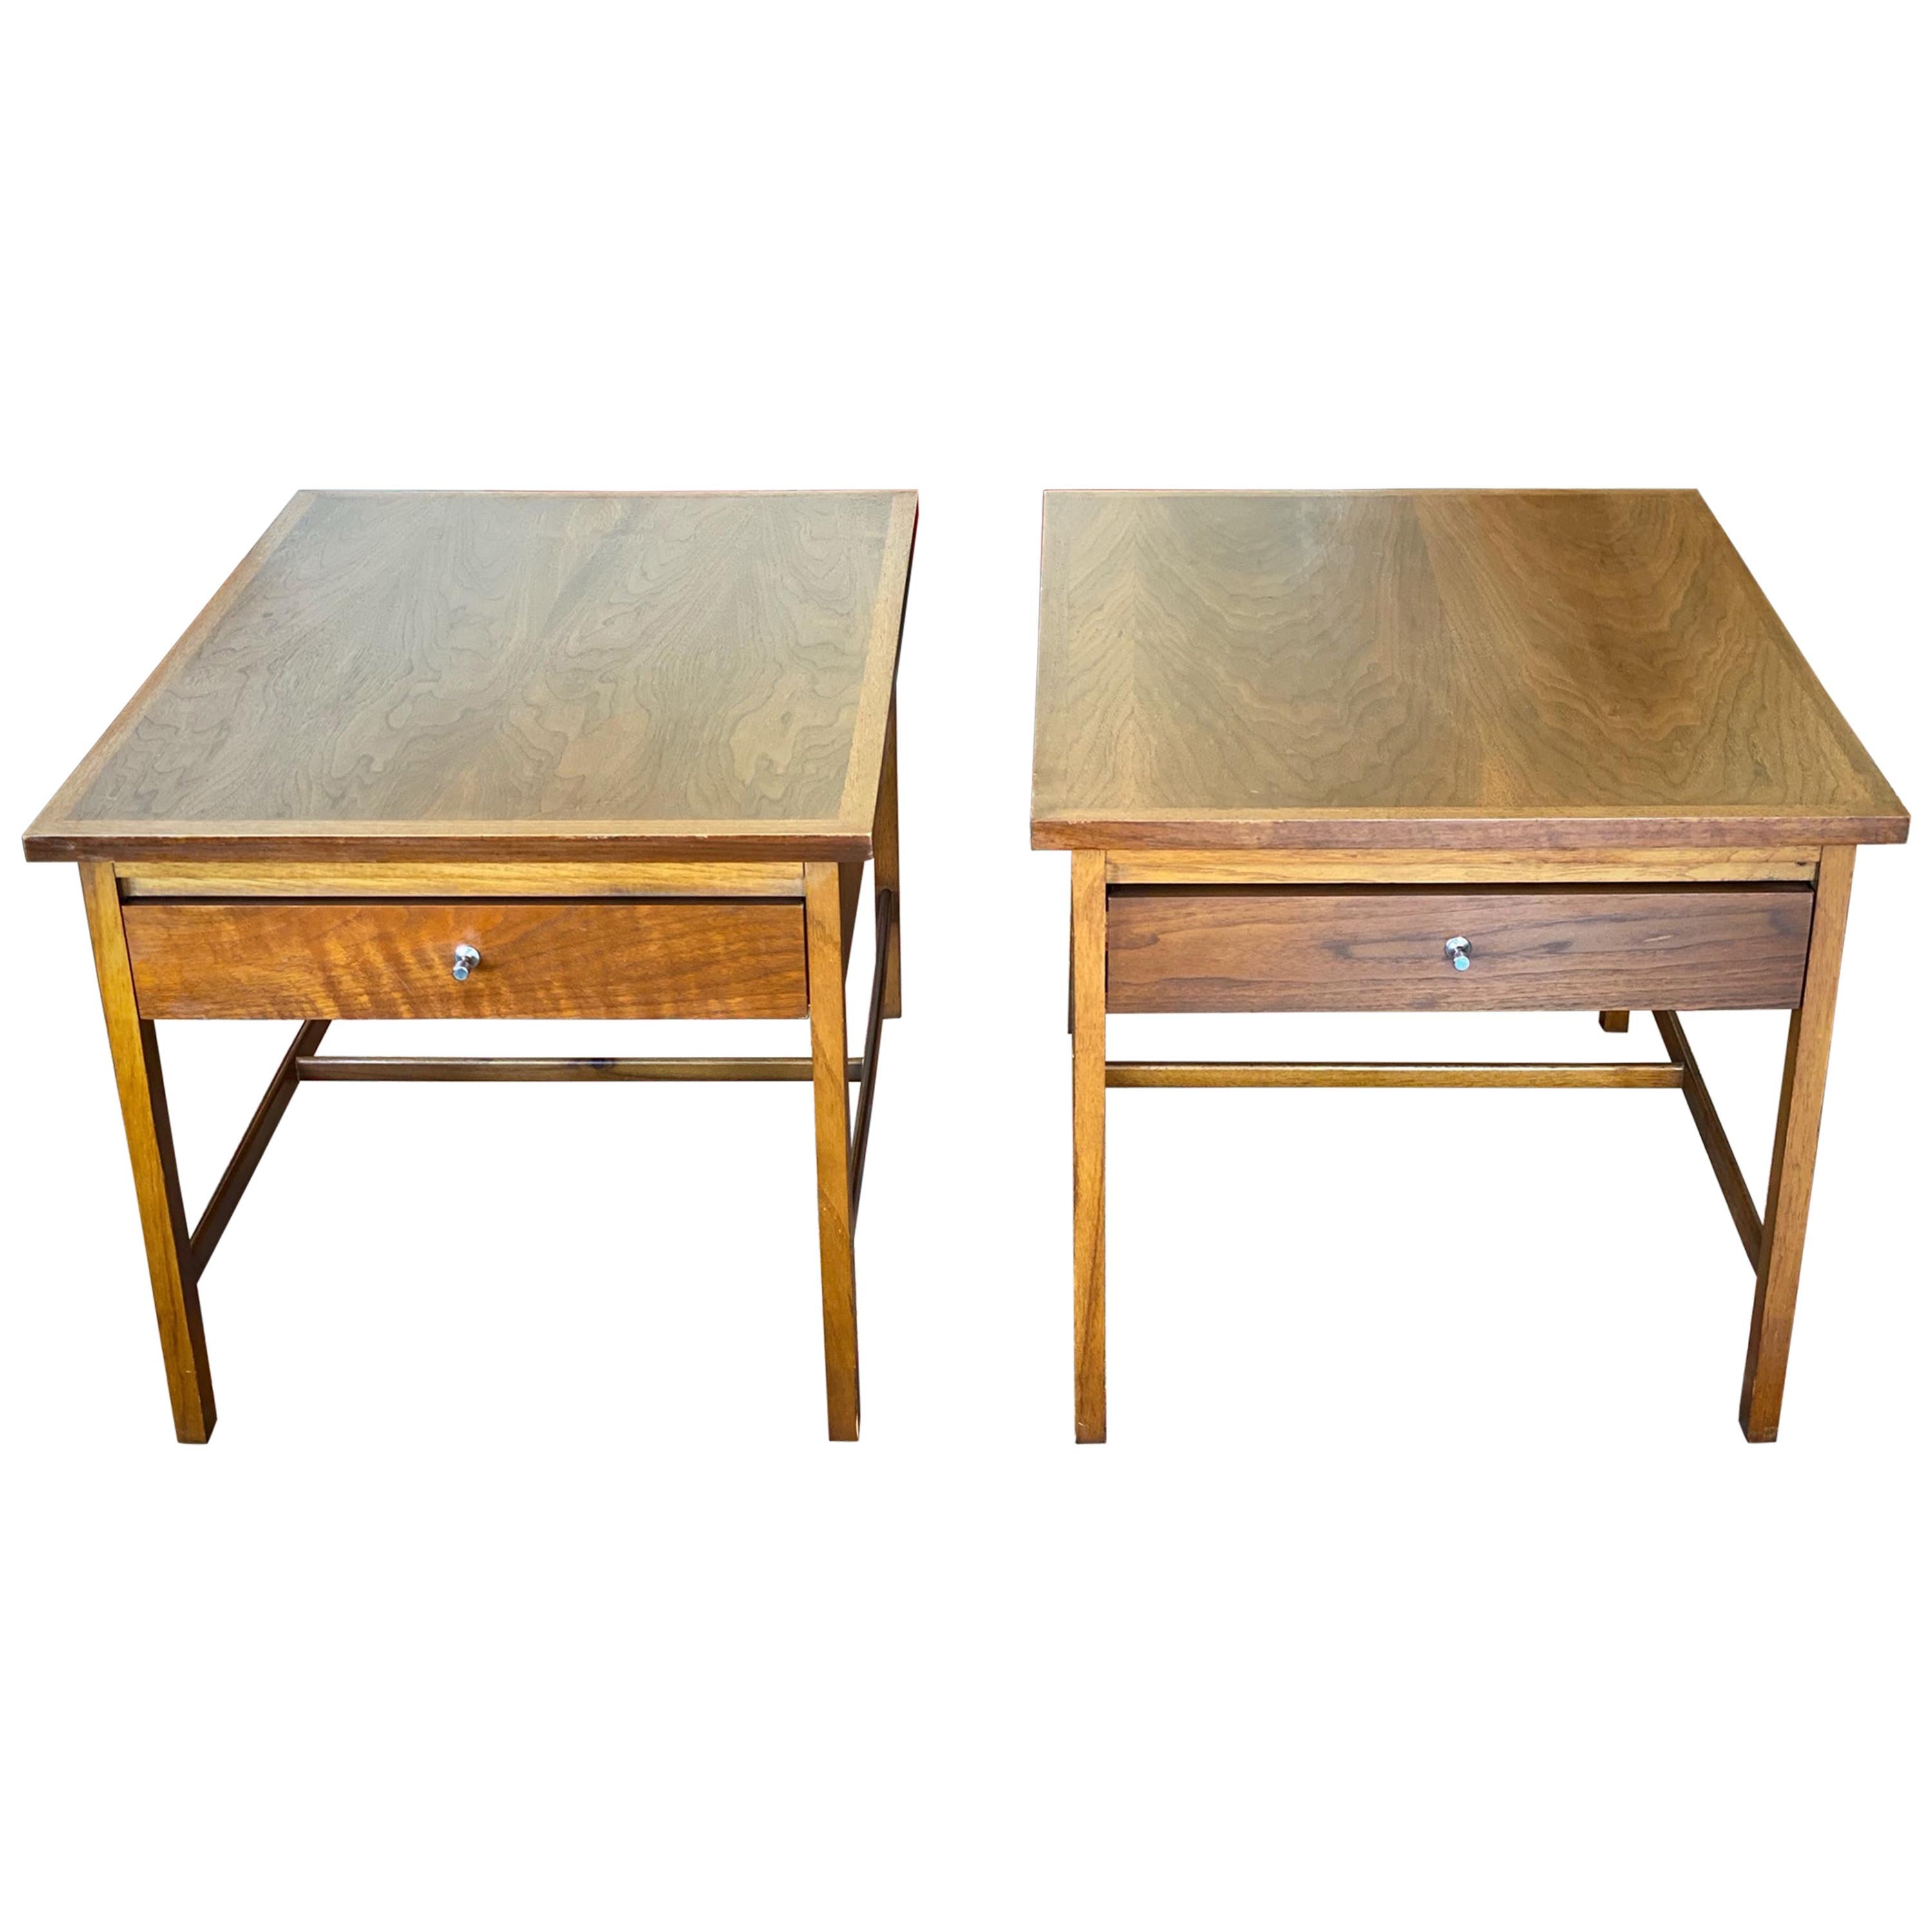 Vintage 1960s Pair of 'Delineator' Walnut Side Tables by Paul McCobb for Lane